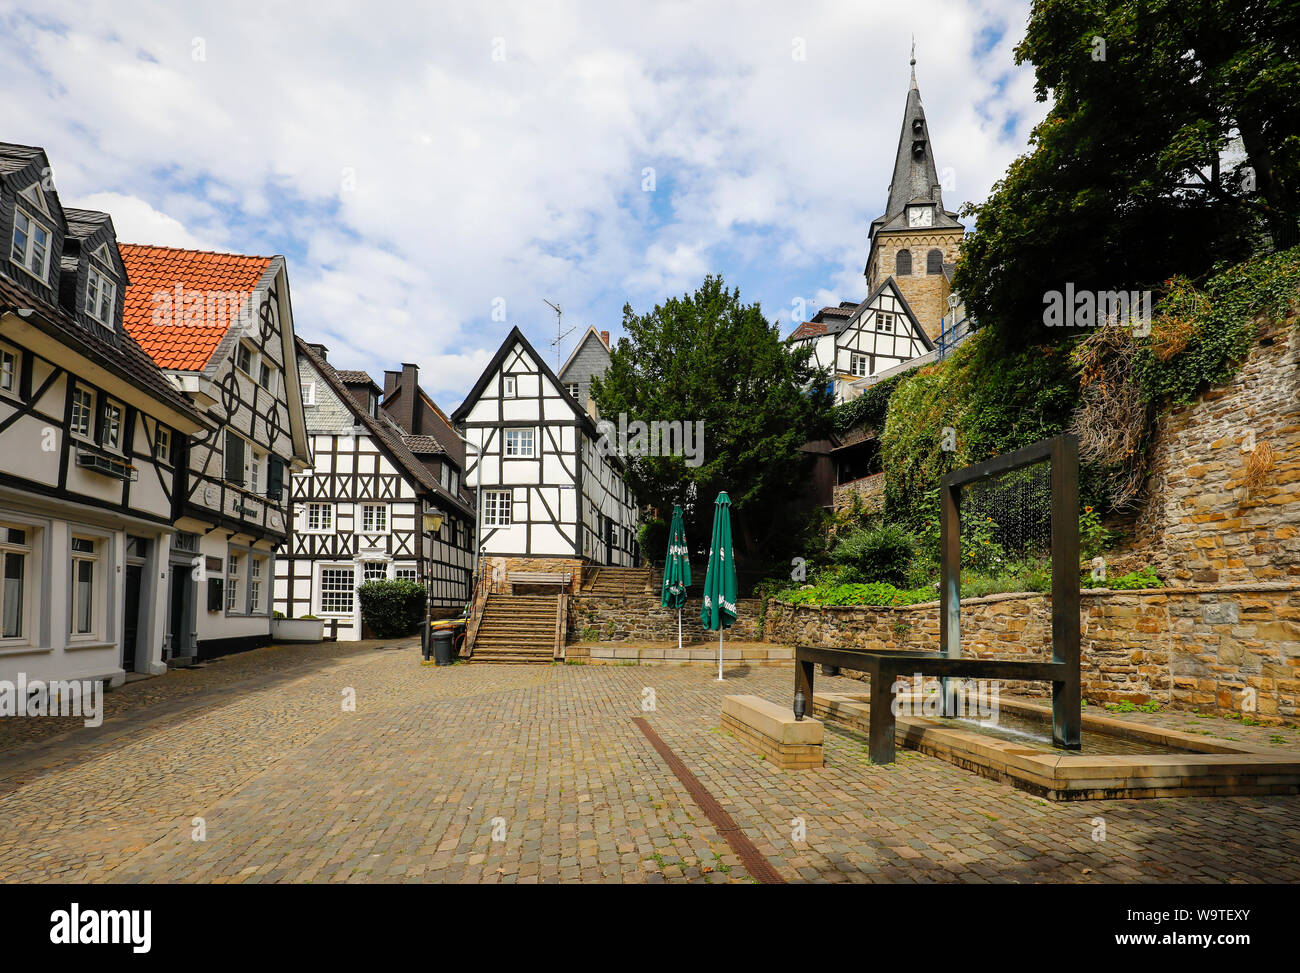 Essen, Ruhr area, North Rhine-Westphalia, Germany - Kettwig, the former independent weaver town has been a district of Essen since 1975, the old town Stock Photo